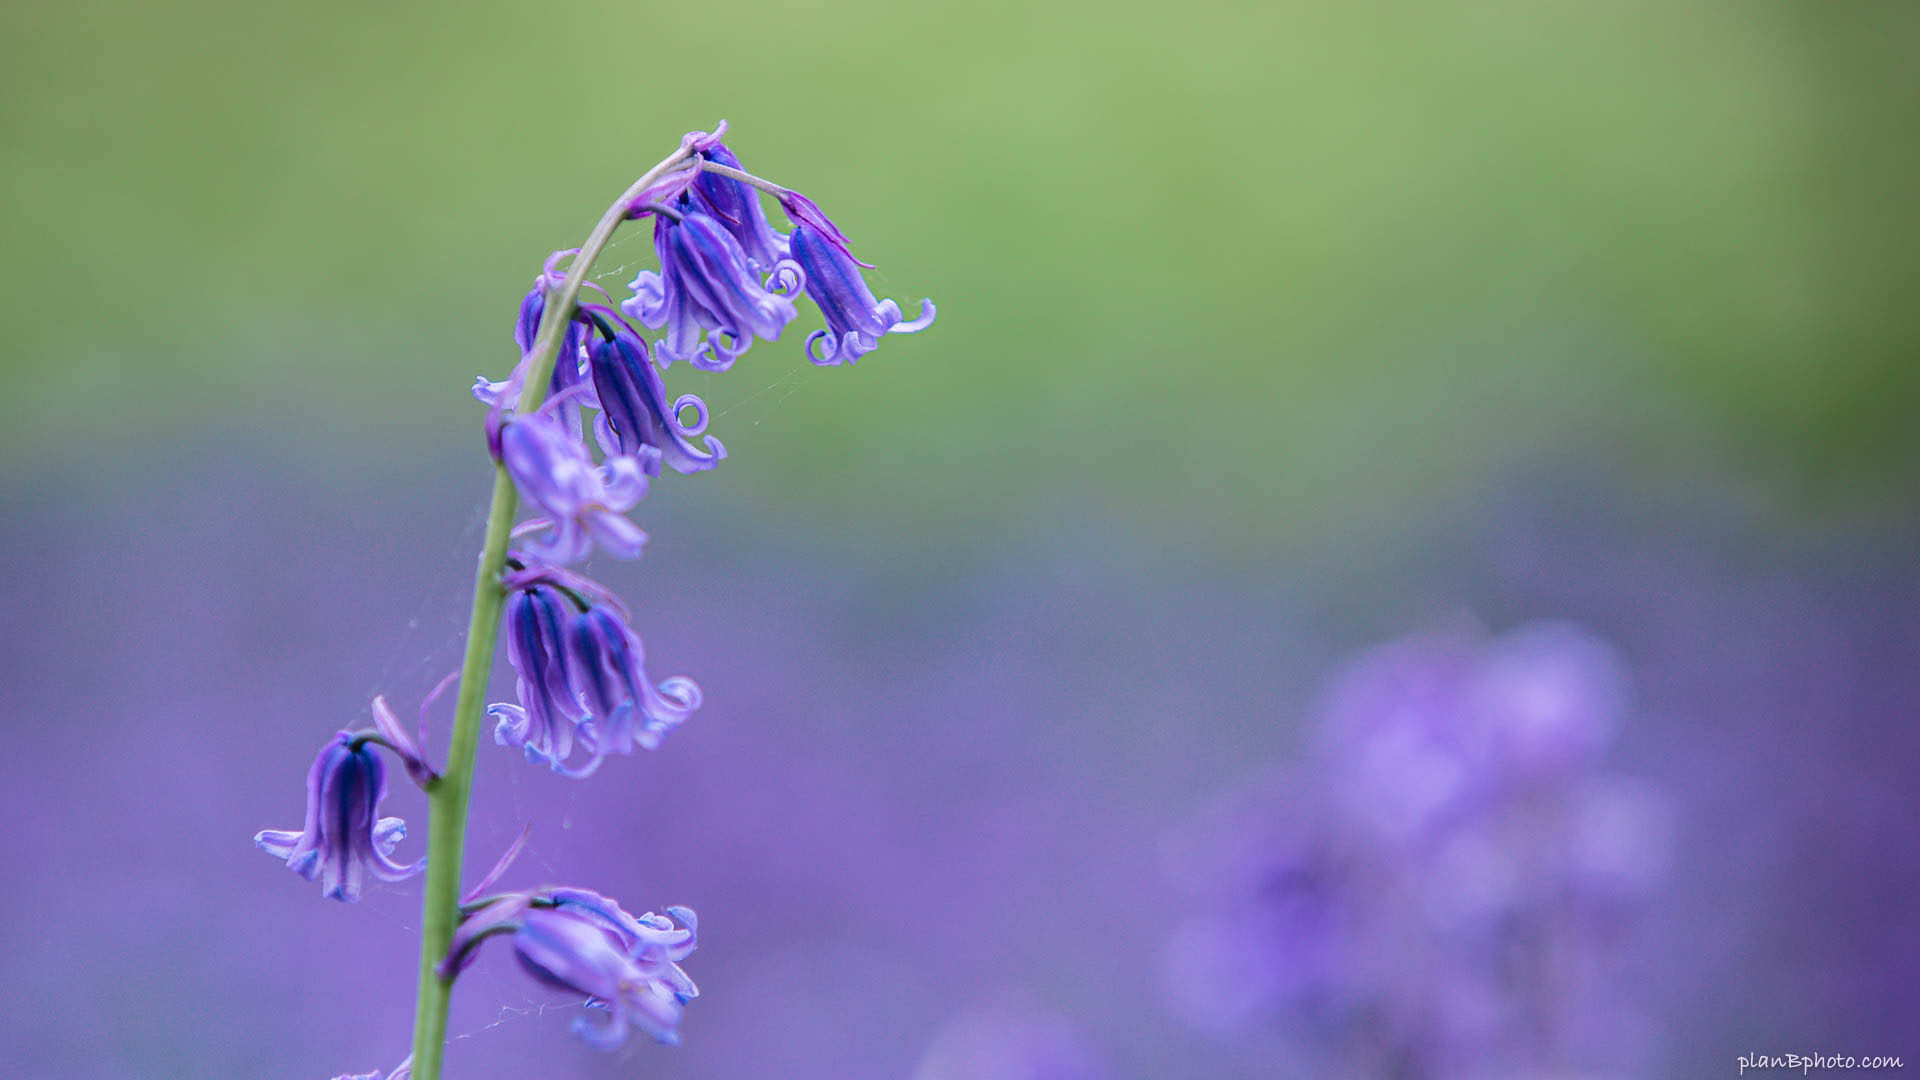 Close uo image of English bluebells on blurred green background